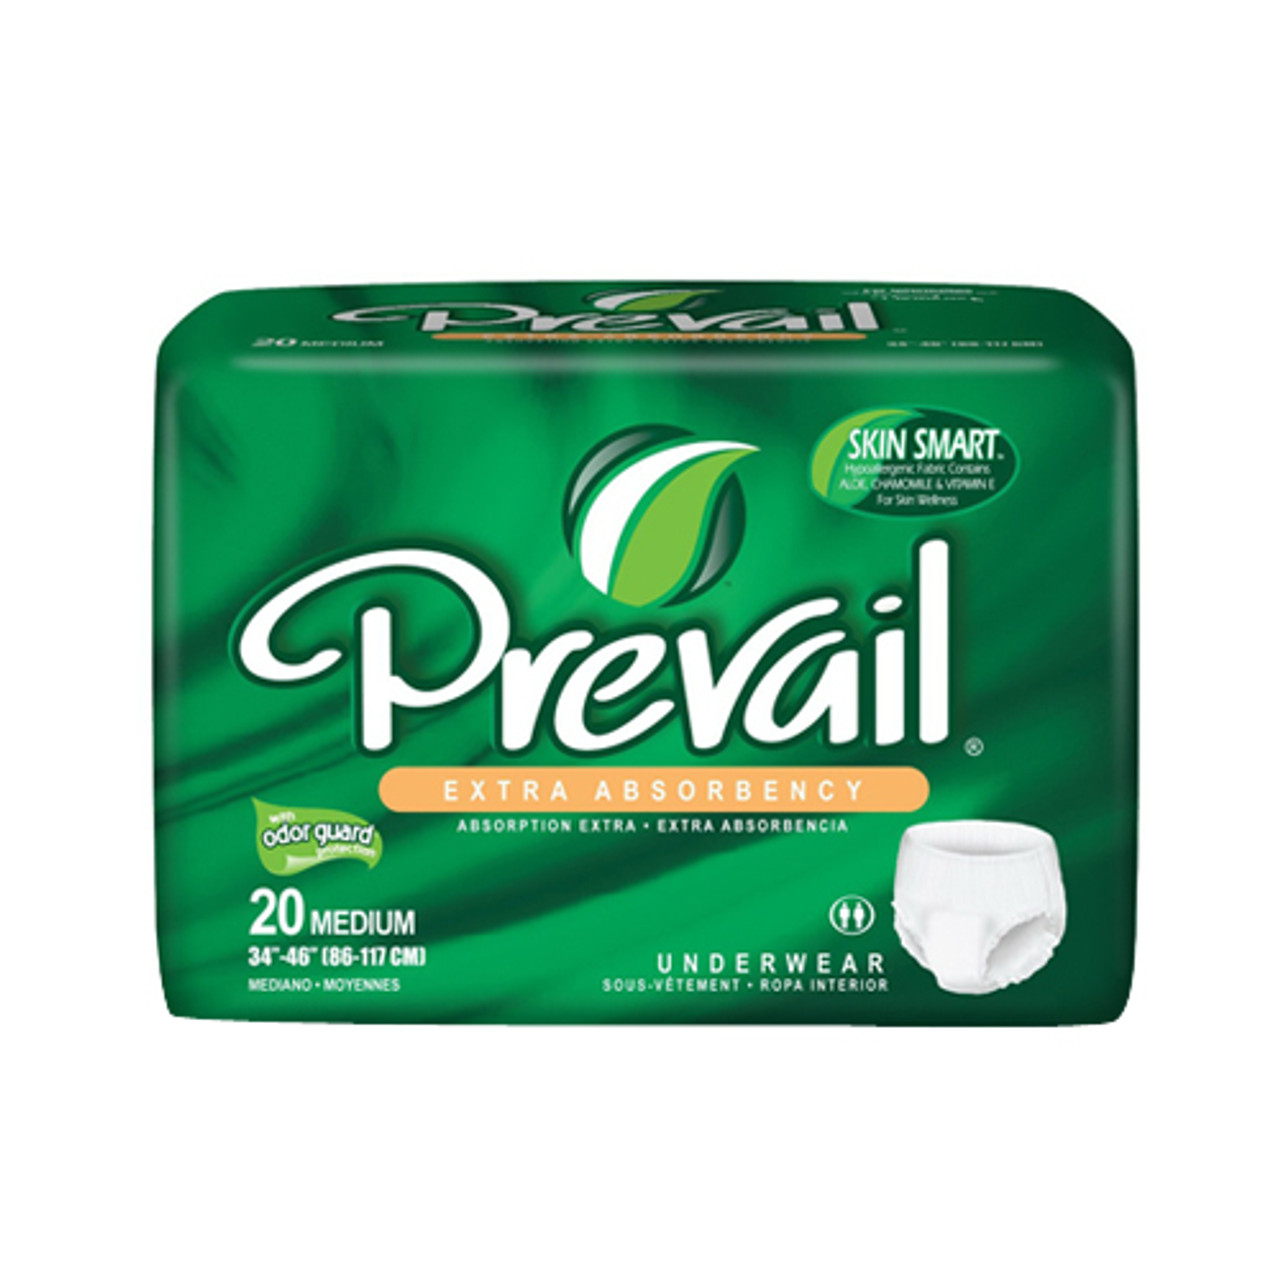 Prevail Per-Fit Extra Absorbency Incontinence Underwear, Medium